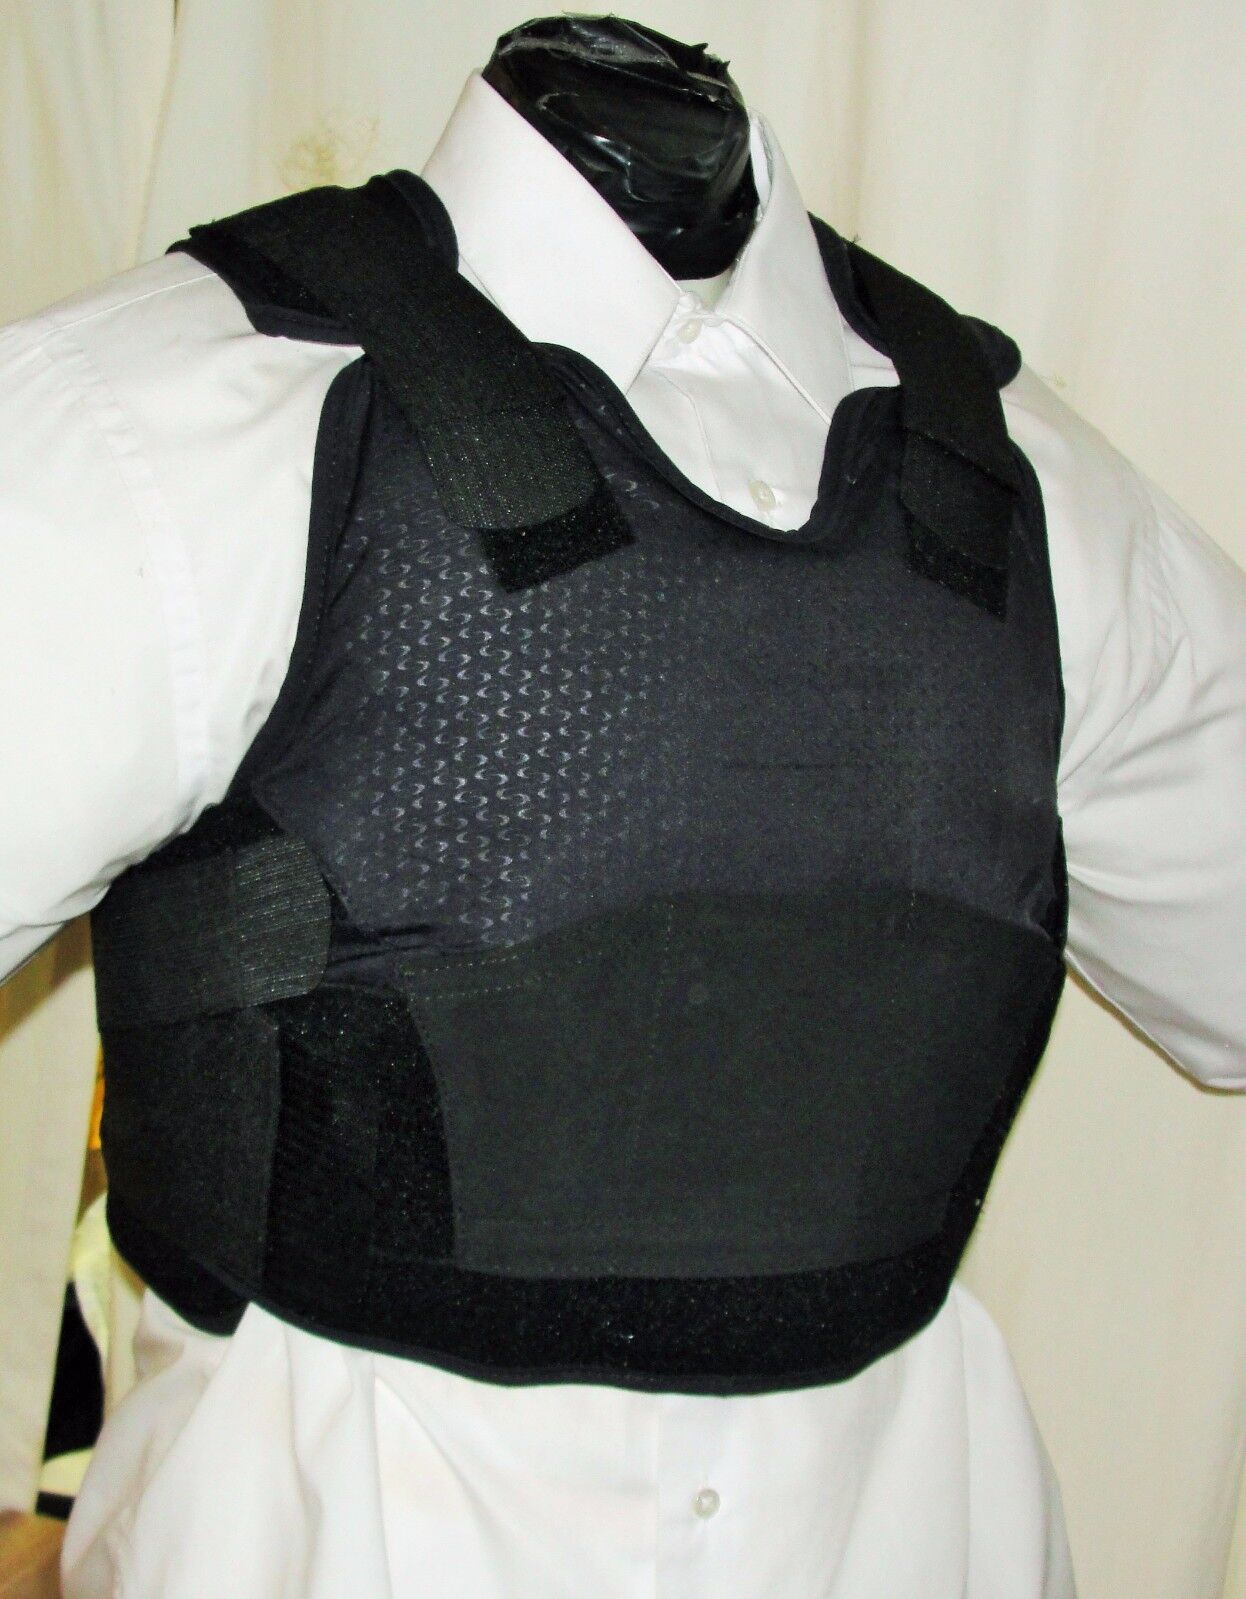 Med Female IIIA BulletProof Concealable Body Armor Carrier Vest with Inserts